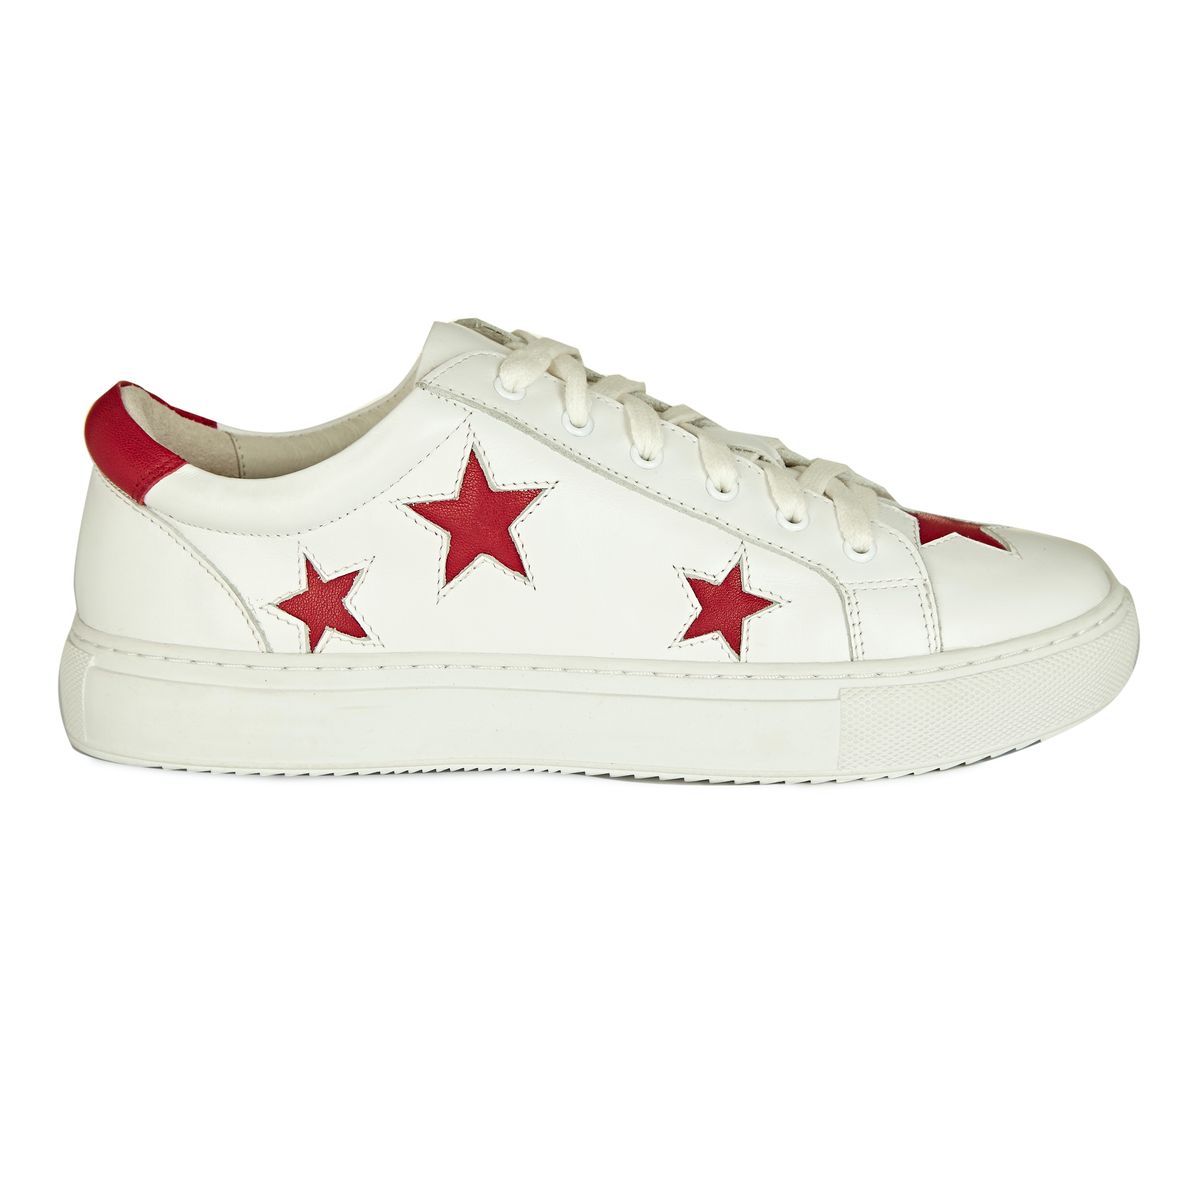 Hoxton White with Red Stars trainers